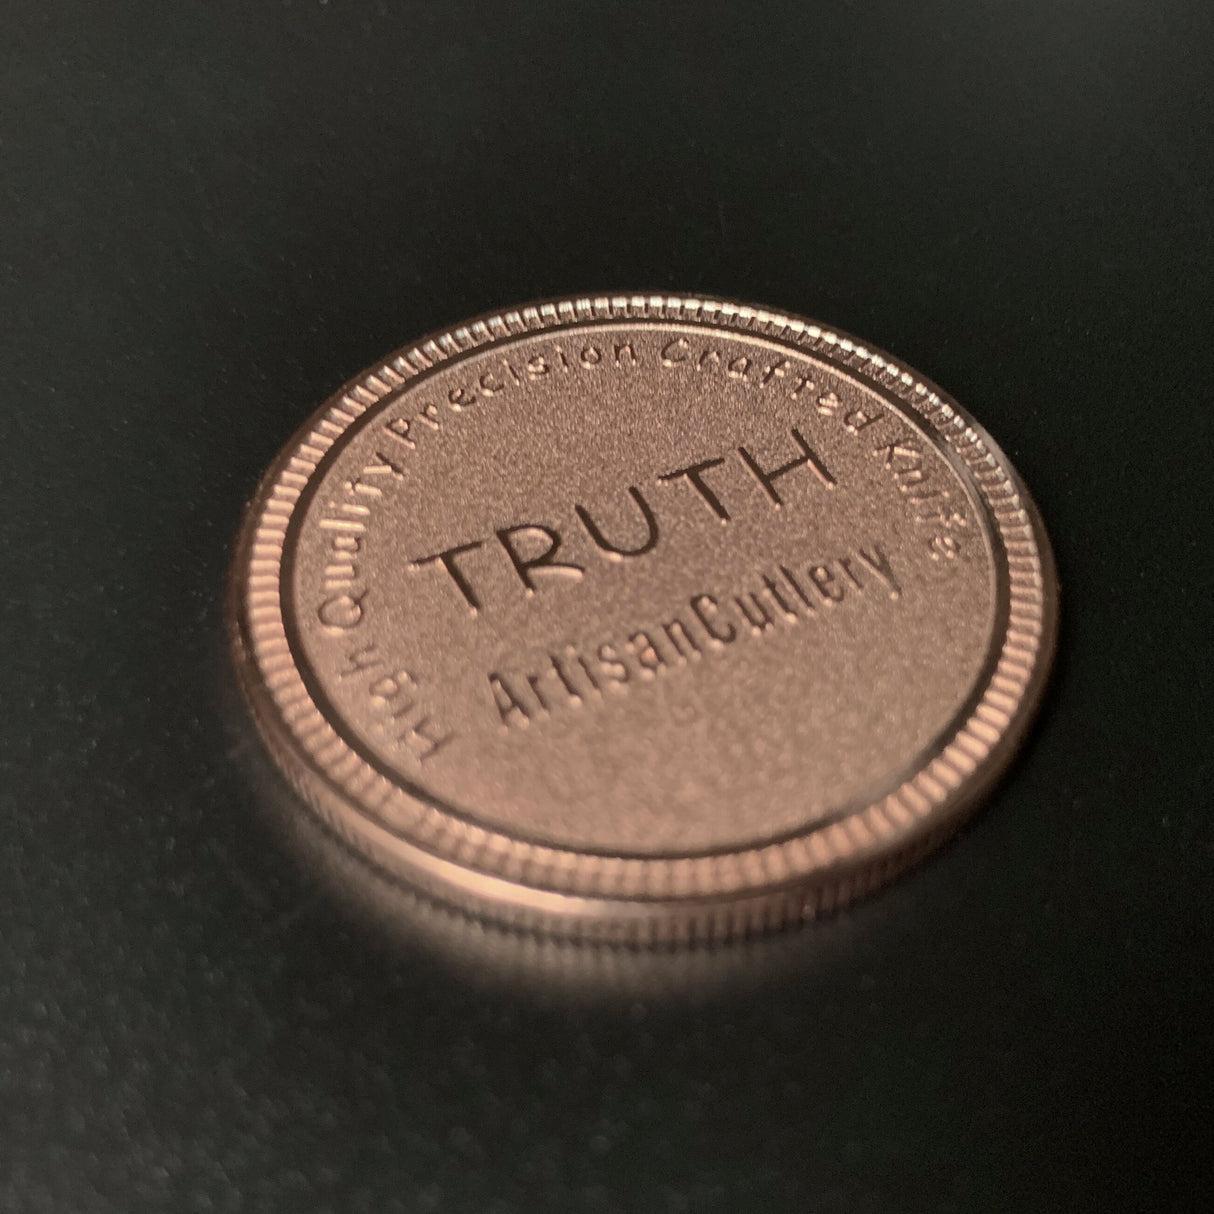 ArtisanCutlery Truth or Dare Game Coin